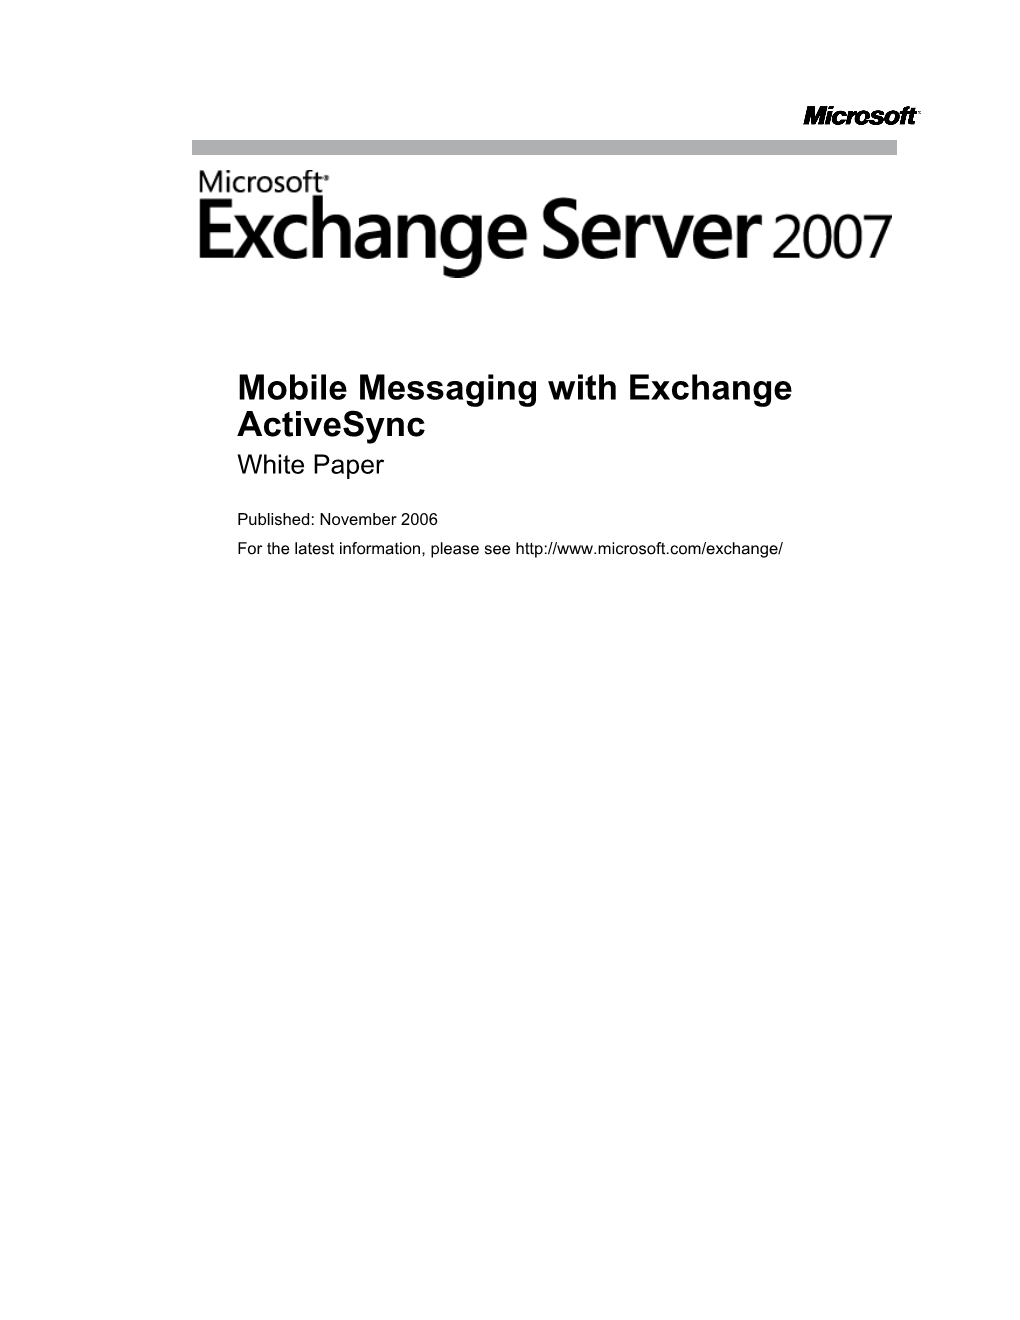 Mobile Messaging with Exchange Activesync